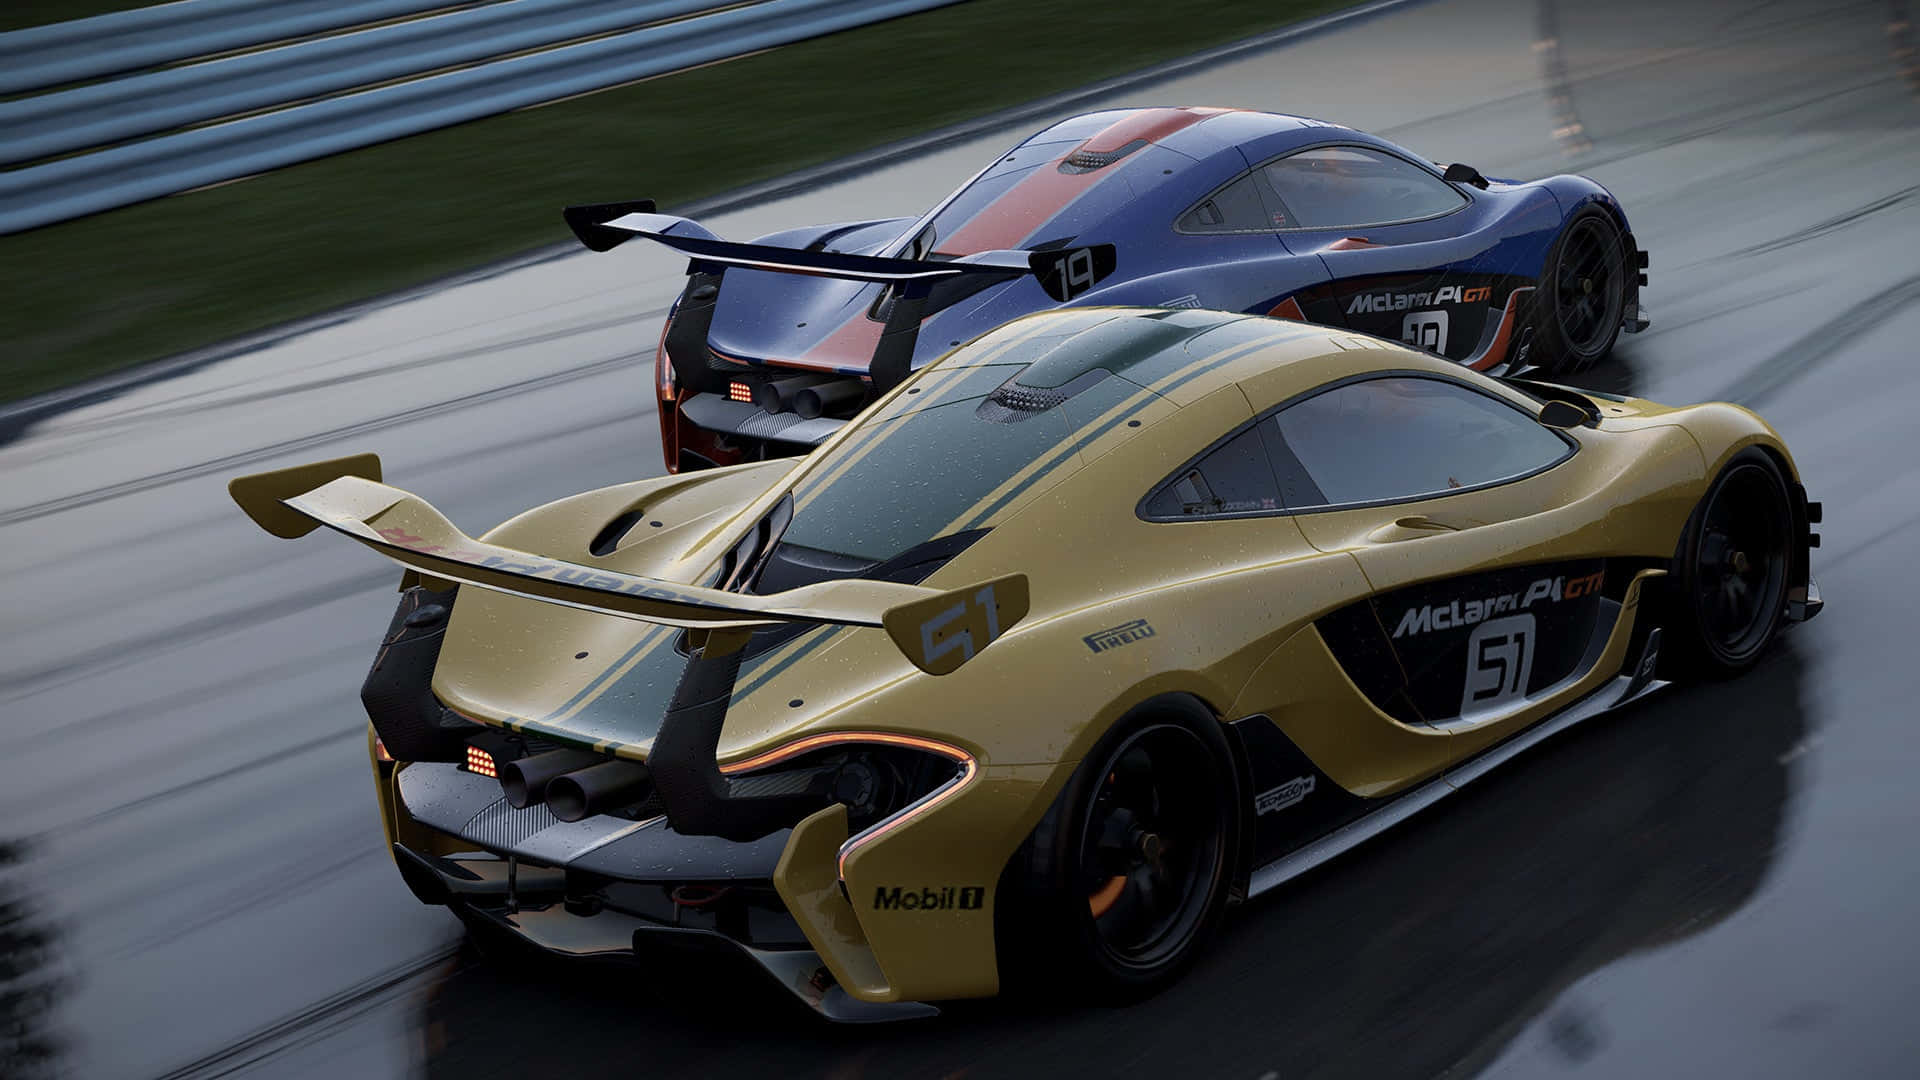 Race like a pro with Project Cars